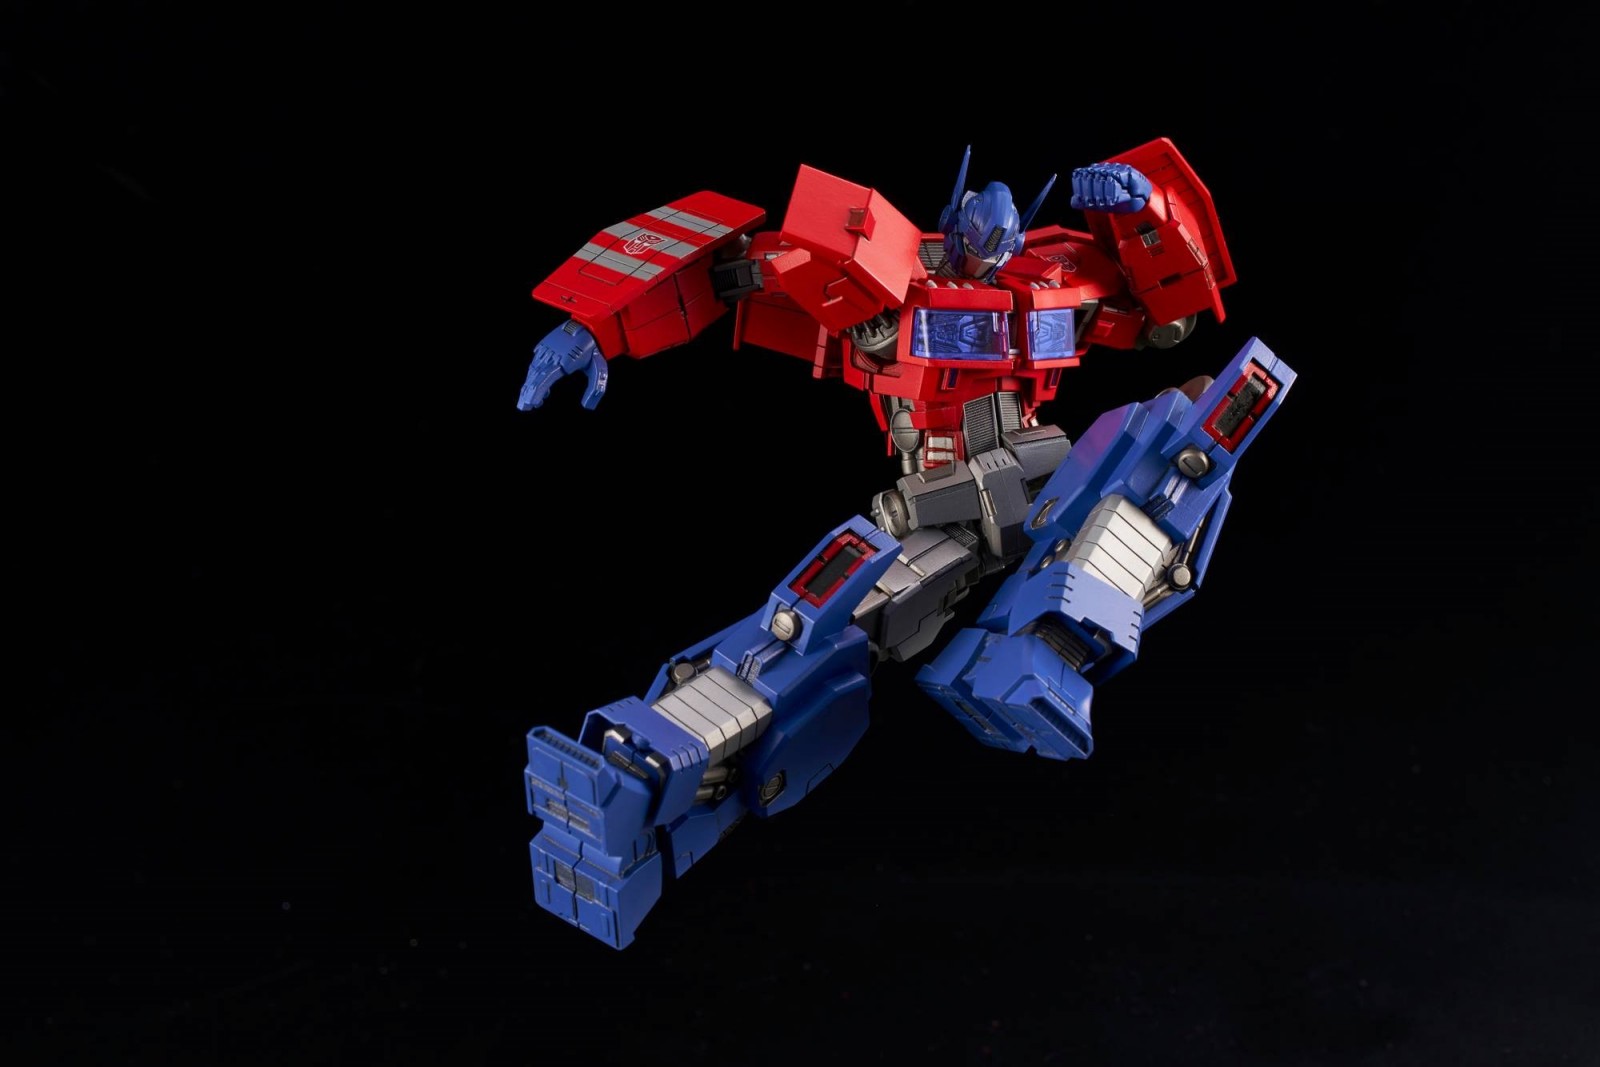 Transformers News: Flame Toys IDW Shattered Glass Drift and Optimus Prime Model Kit Pre-Orders Open